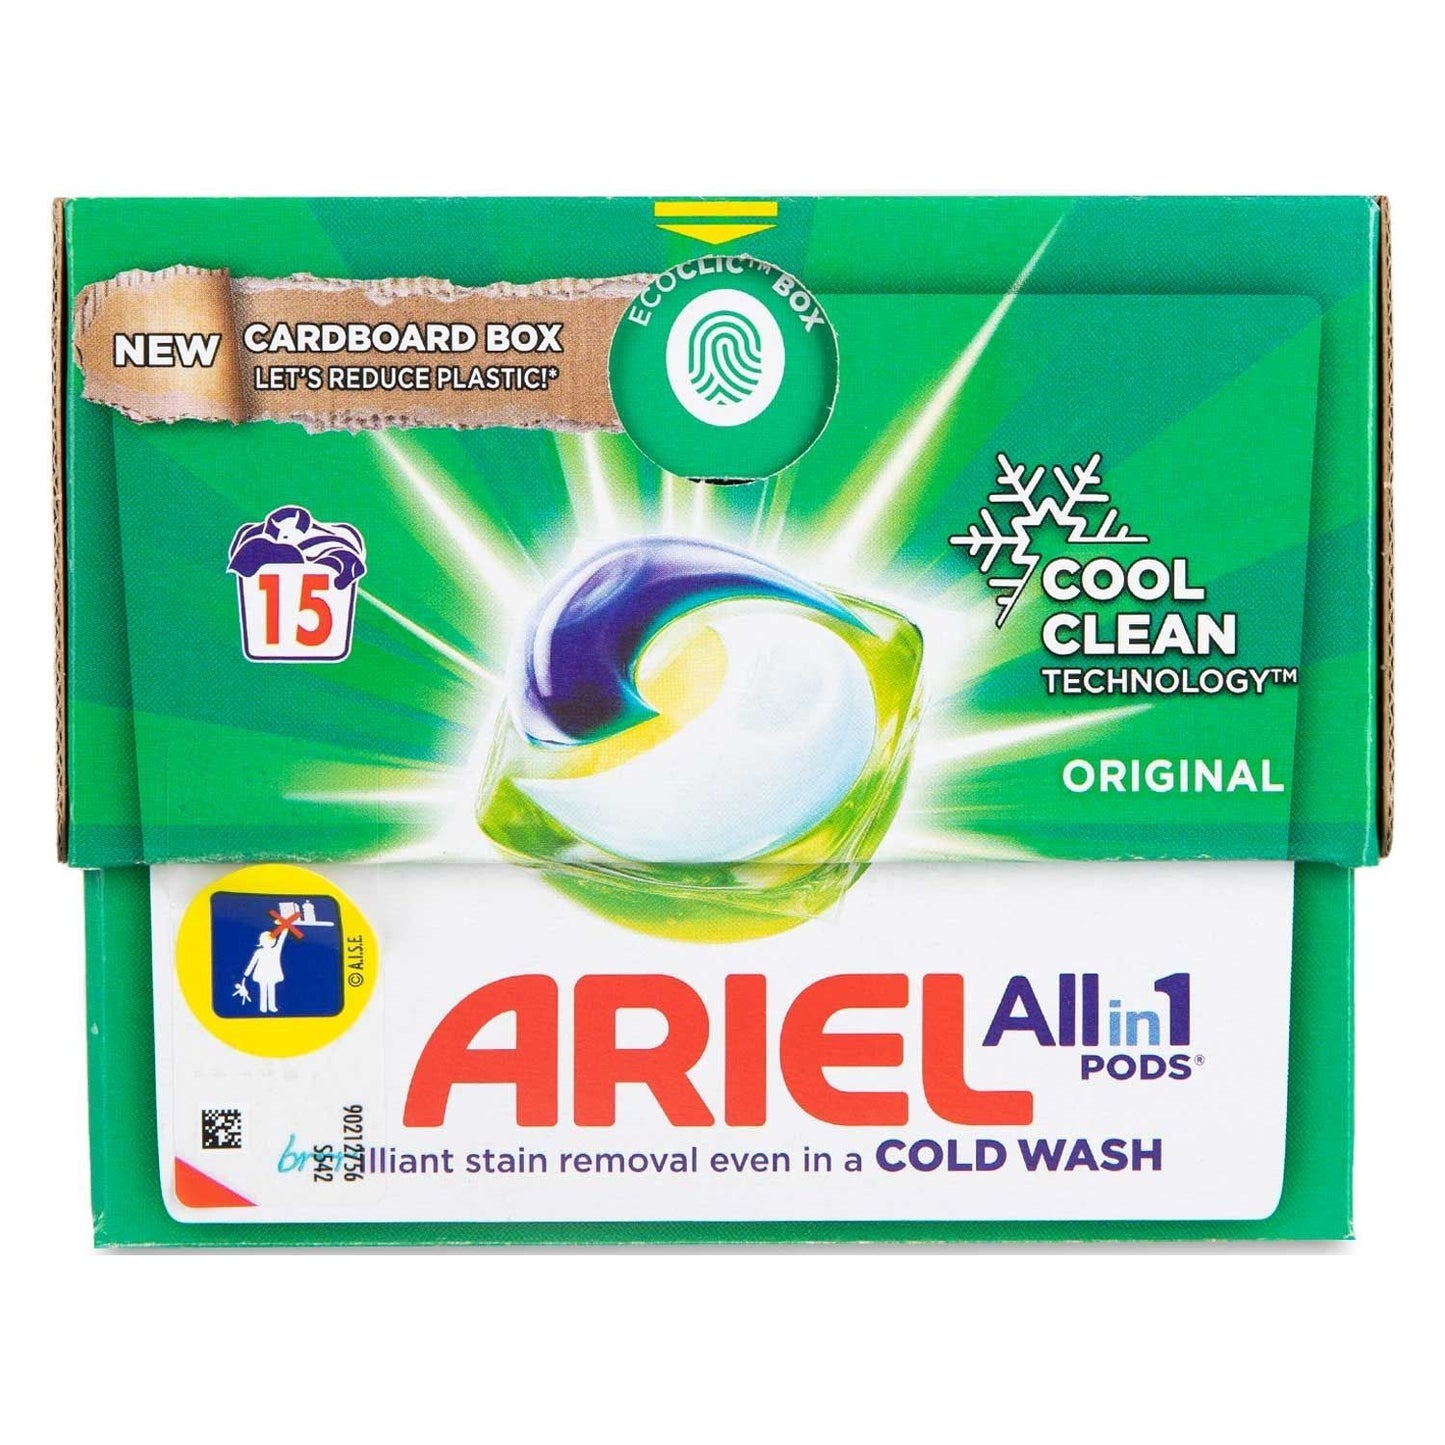 Ariel All-in-1 Pods Washing Liquid Laundry Detergent Tablets